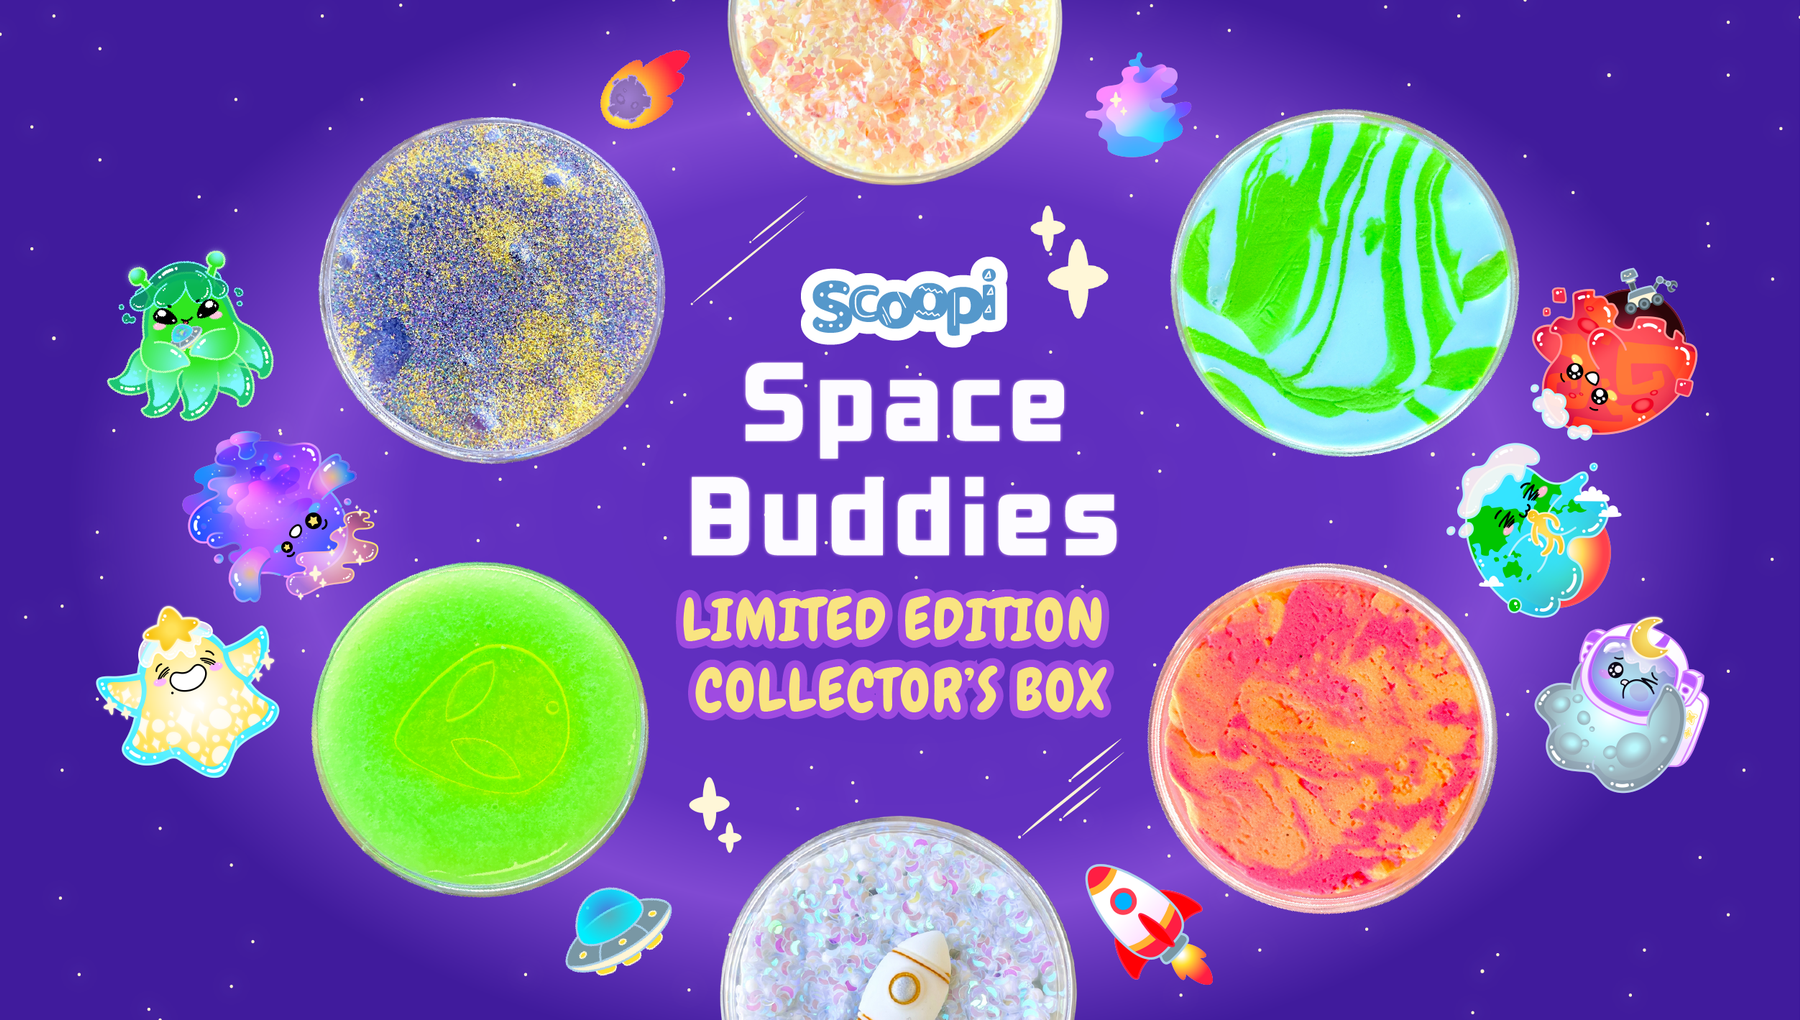 The Space Buddies Have Landed!